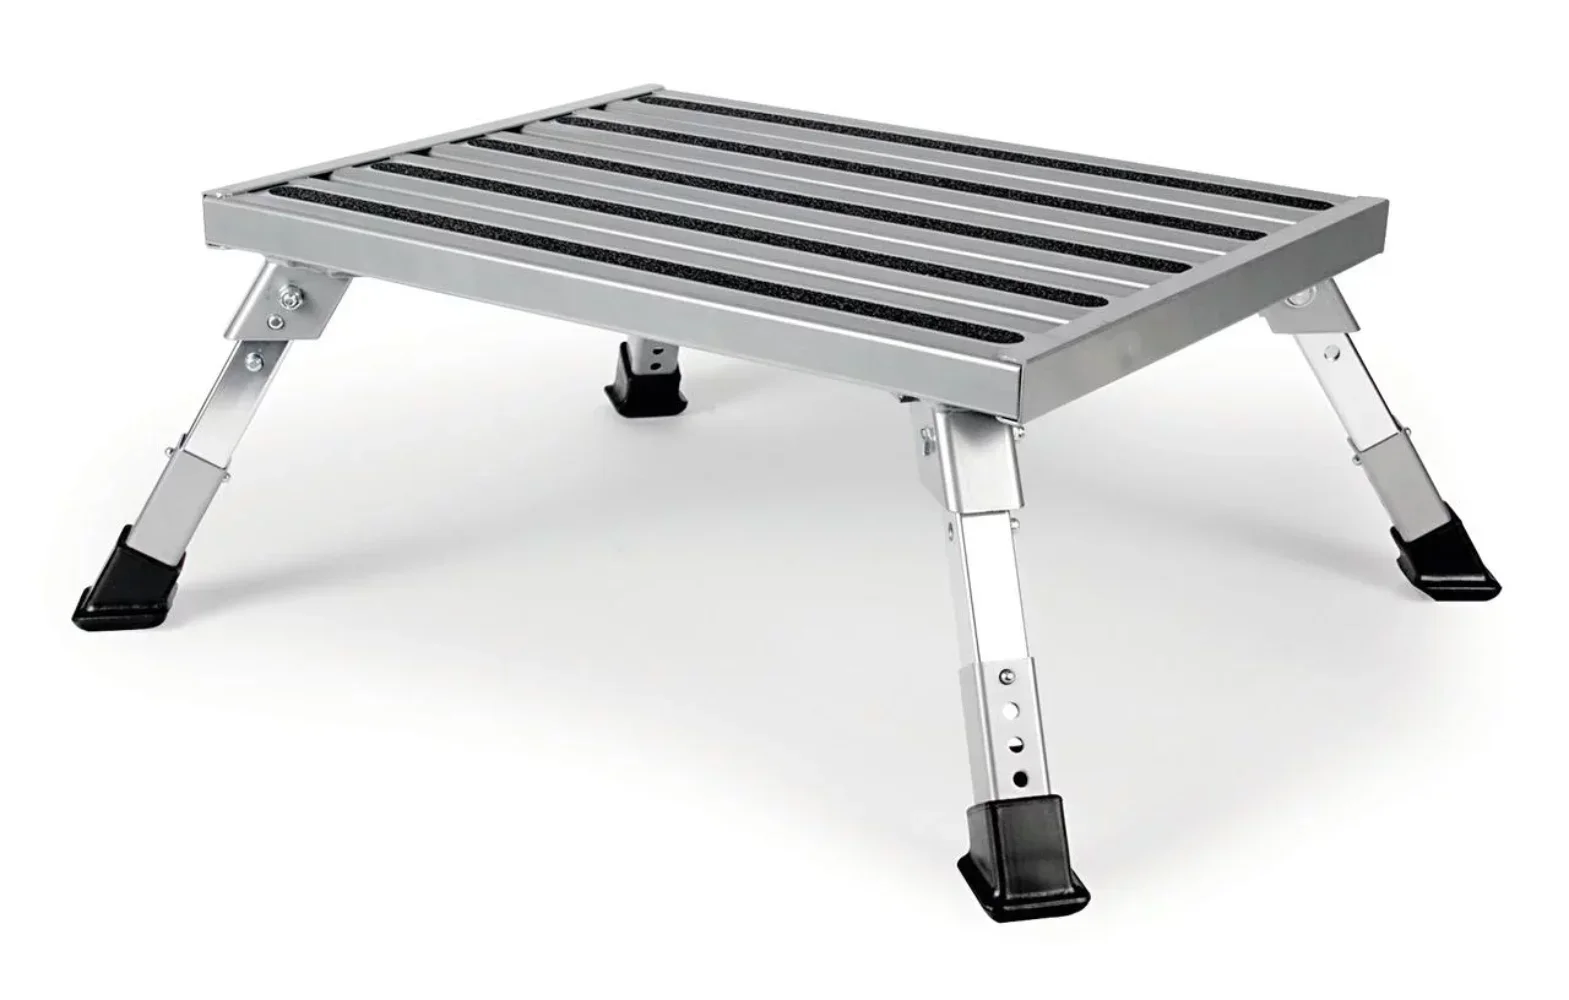 

Camco Adjustable Height Platform Step | Supports up to 1,000lbs. | Aluminum, Silver (43676)